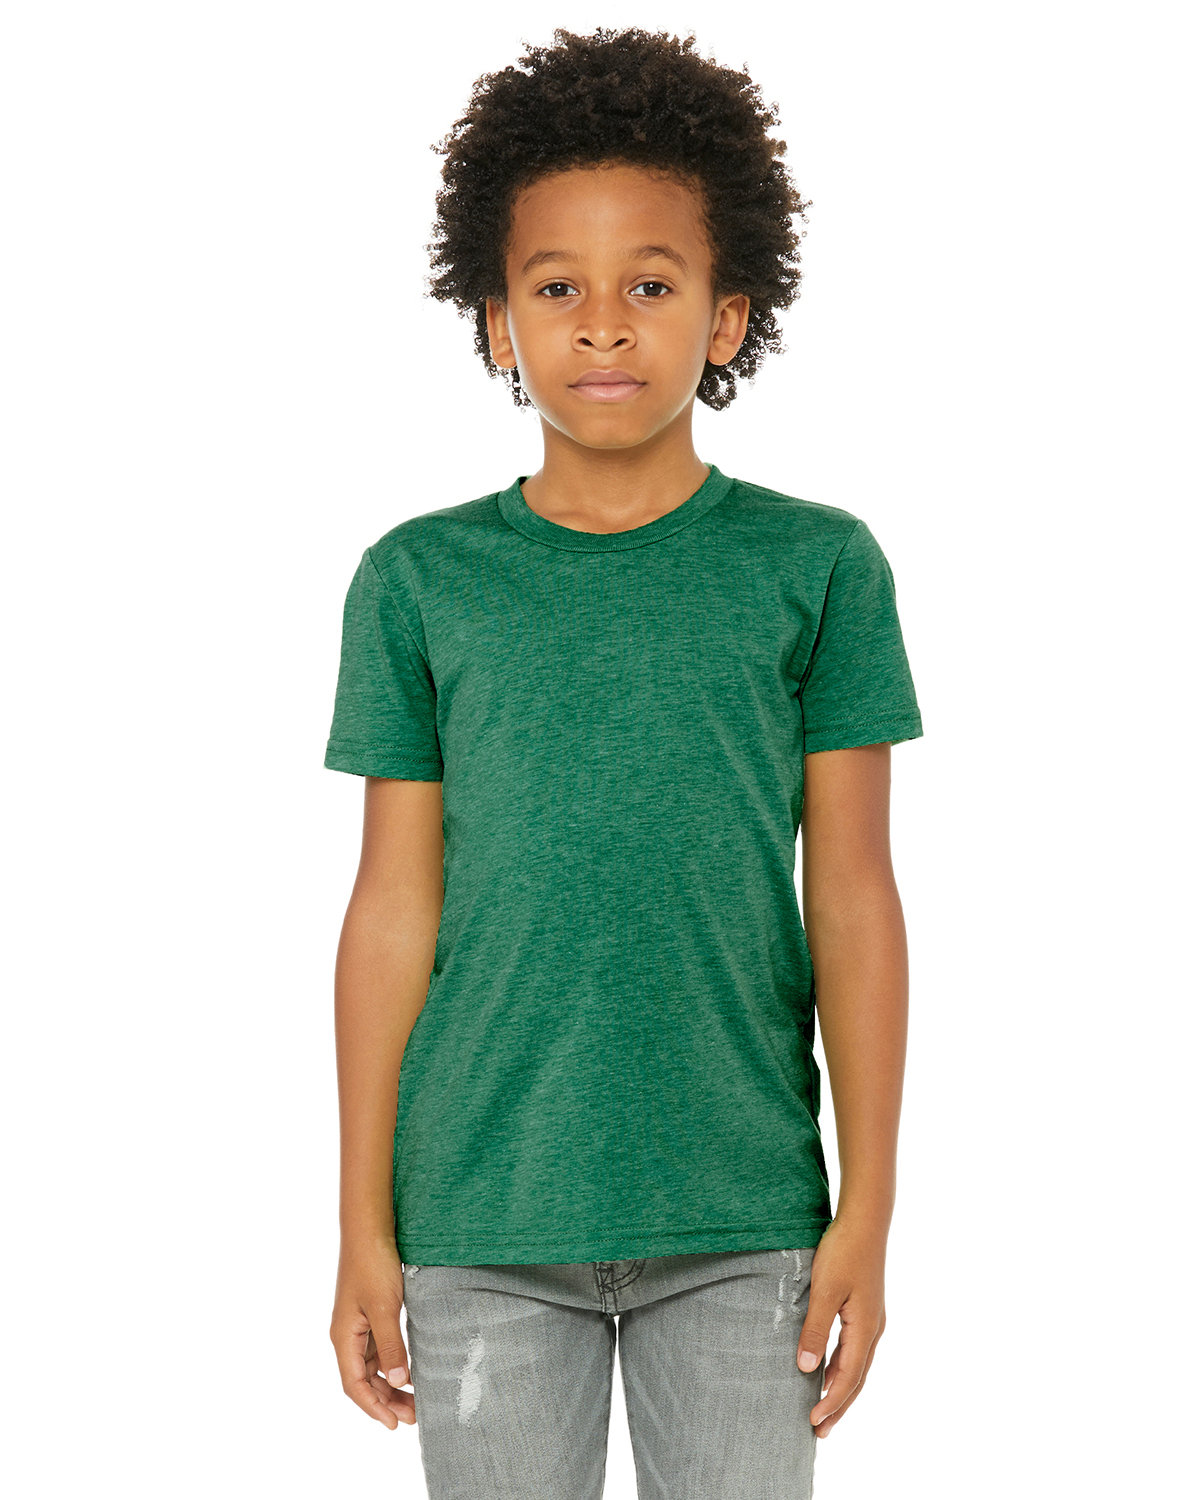 Bella + Canvas Youth Triblend Short-Sleeve T-Shirt KELLY TRIBLEND 